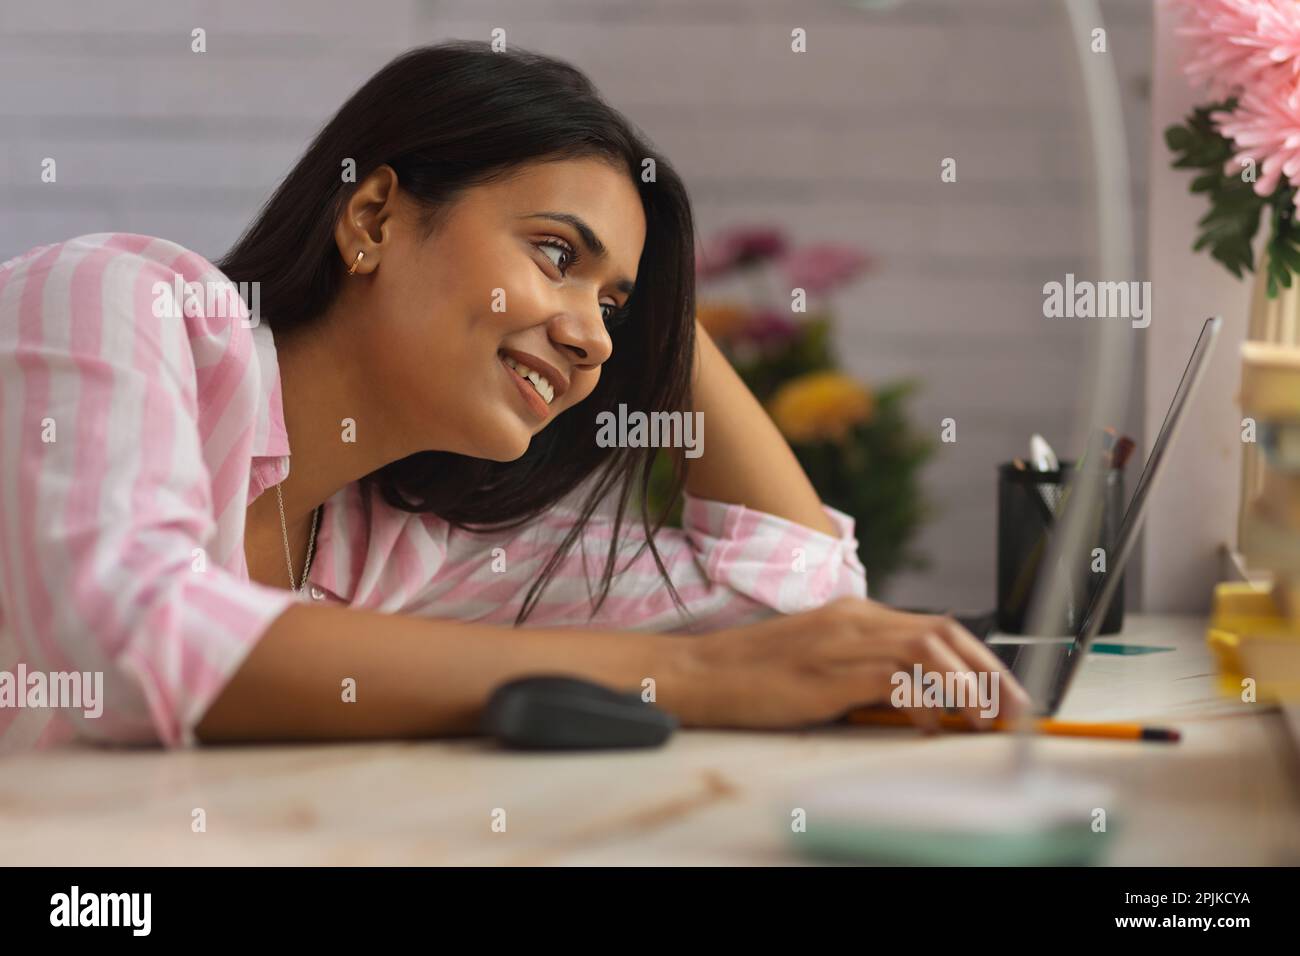 Close-up portrait of a young woman leaning on desk and using laptop Stock Photo